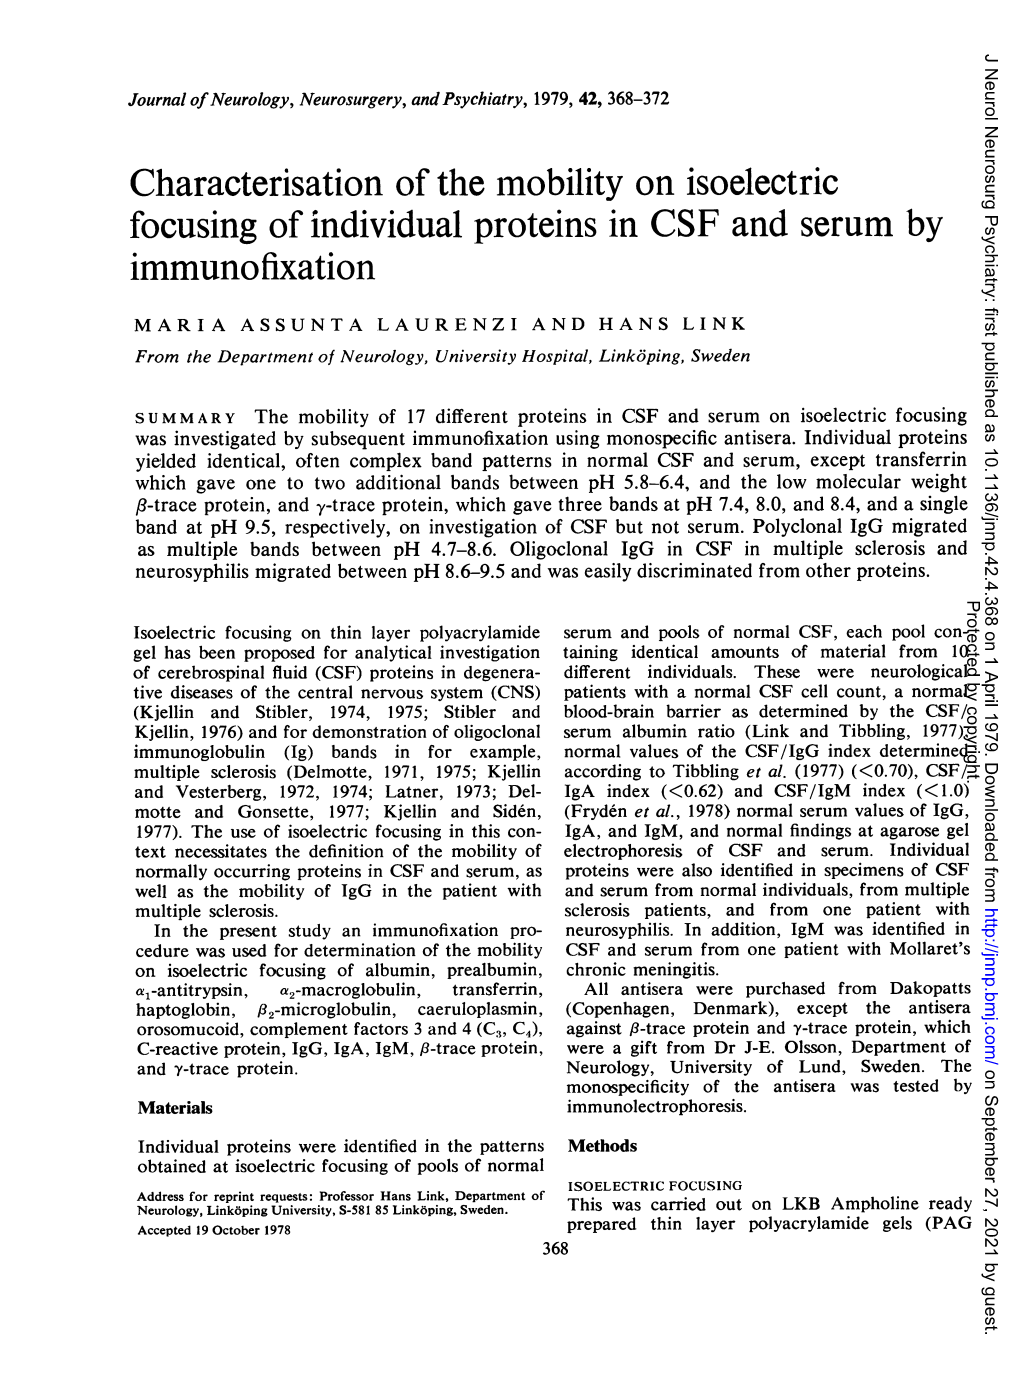 Characterisation of the Mobility on Isoelectric Focusing of Individual Proteins in CSF and Serum by Immunofixation